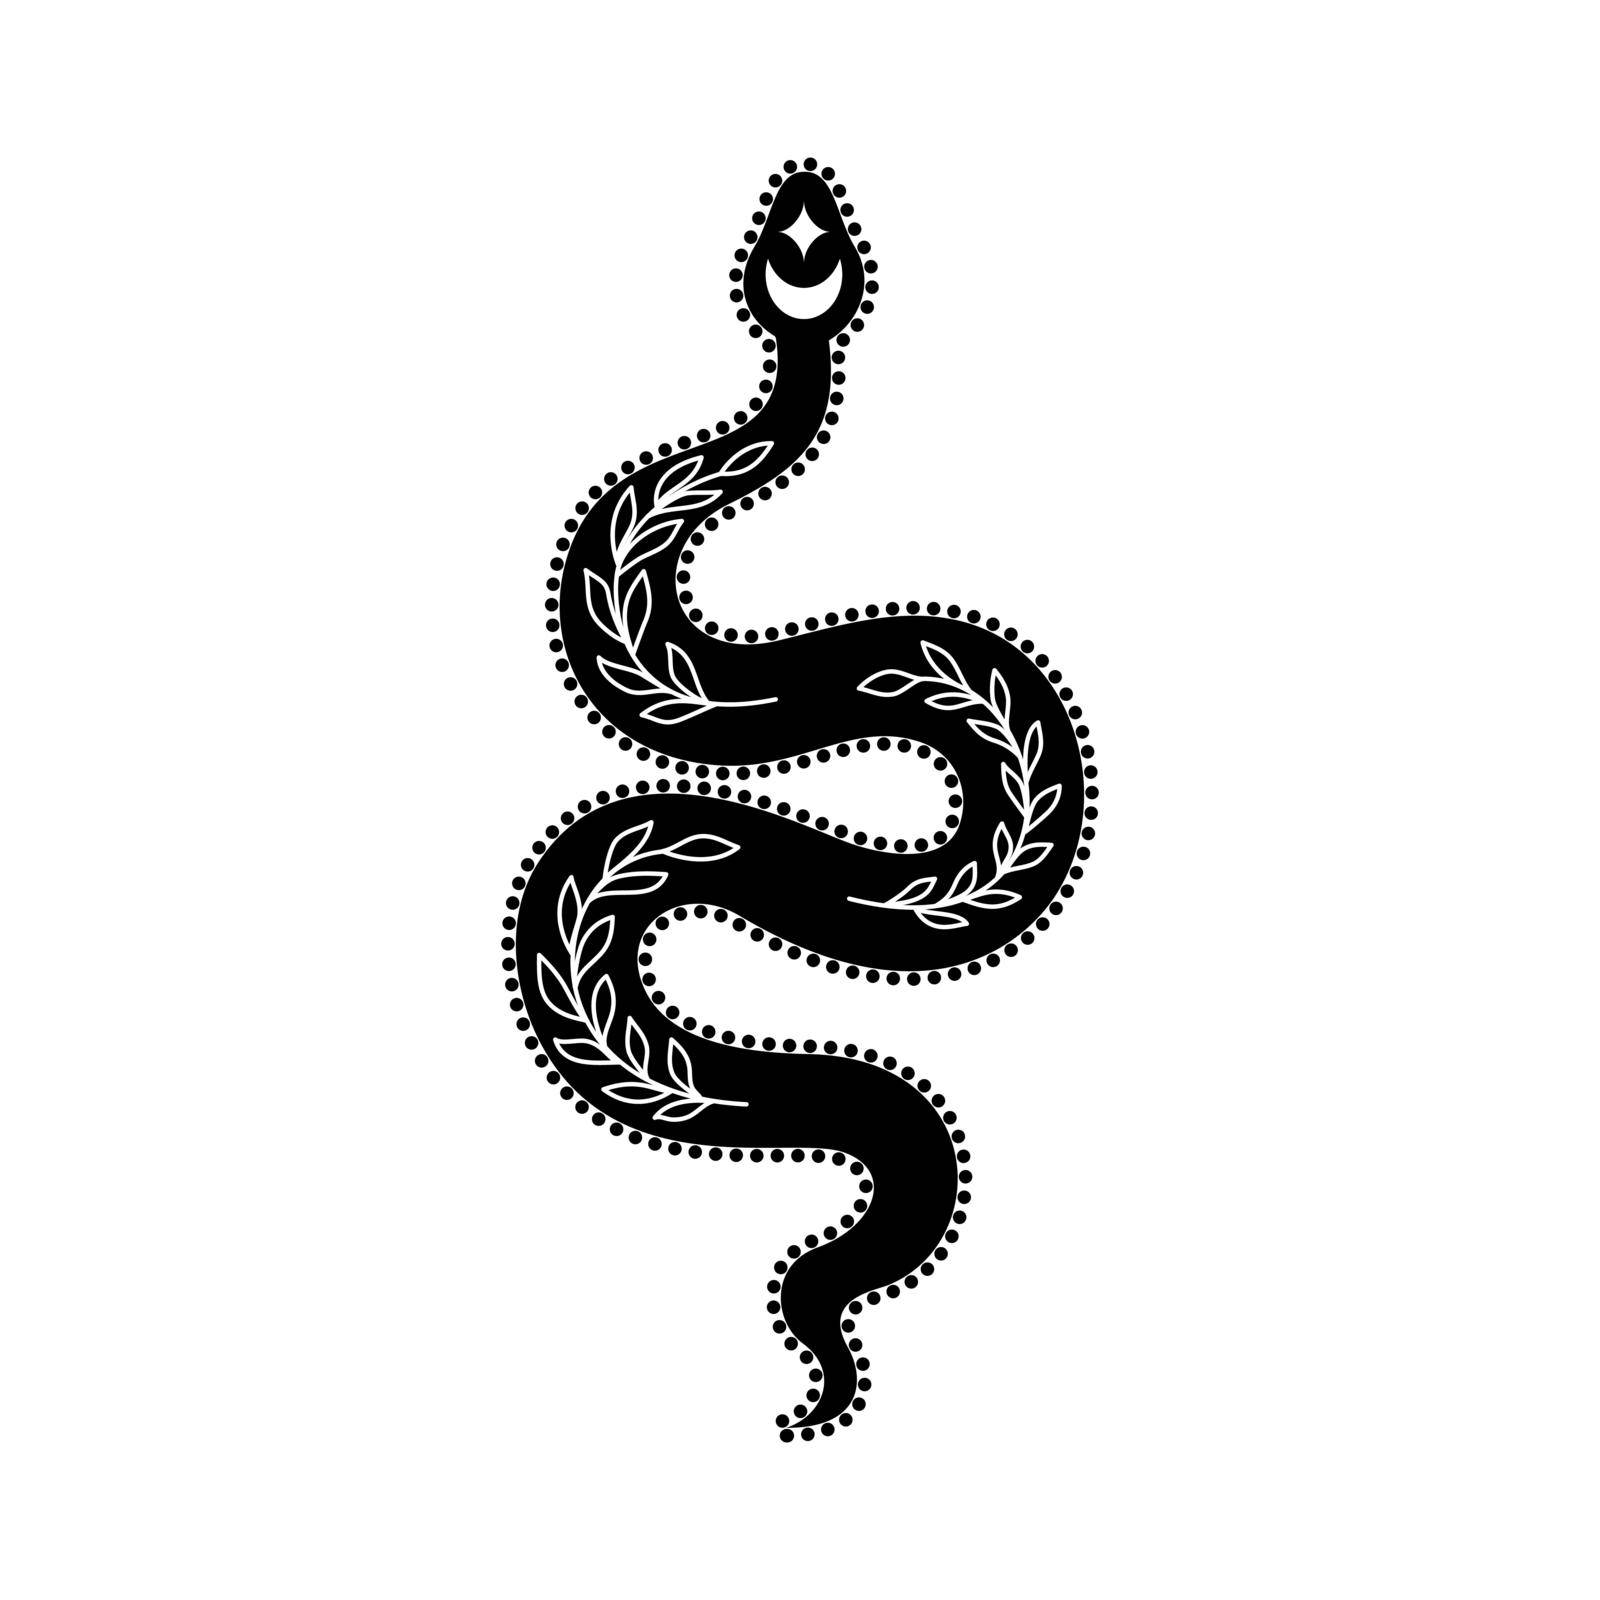 Mystic snake in doodle style on white background.